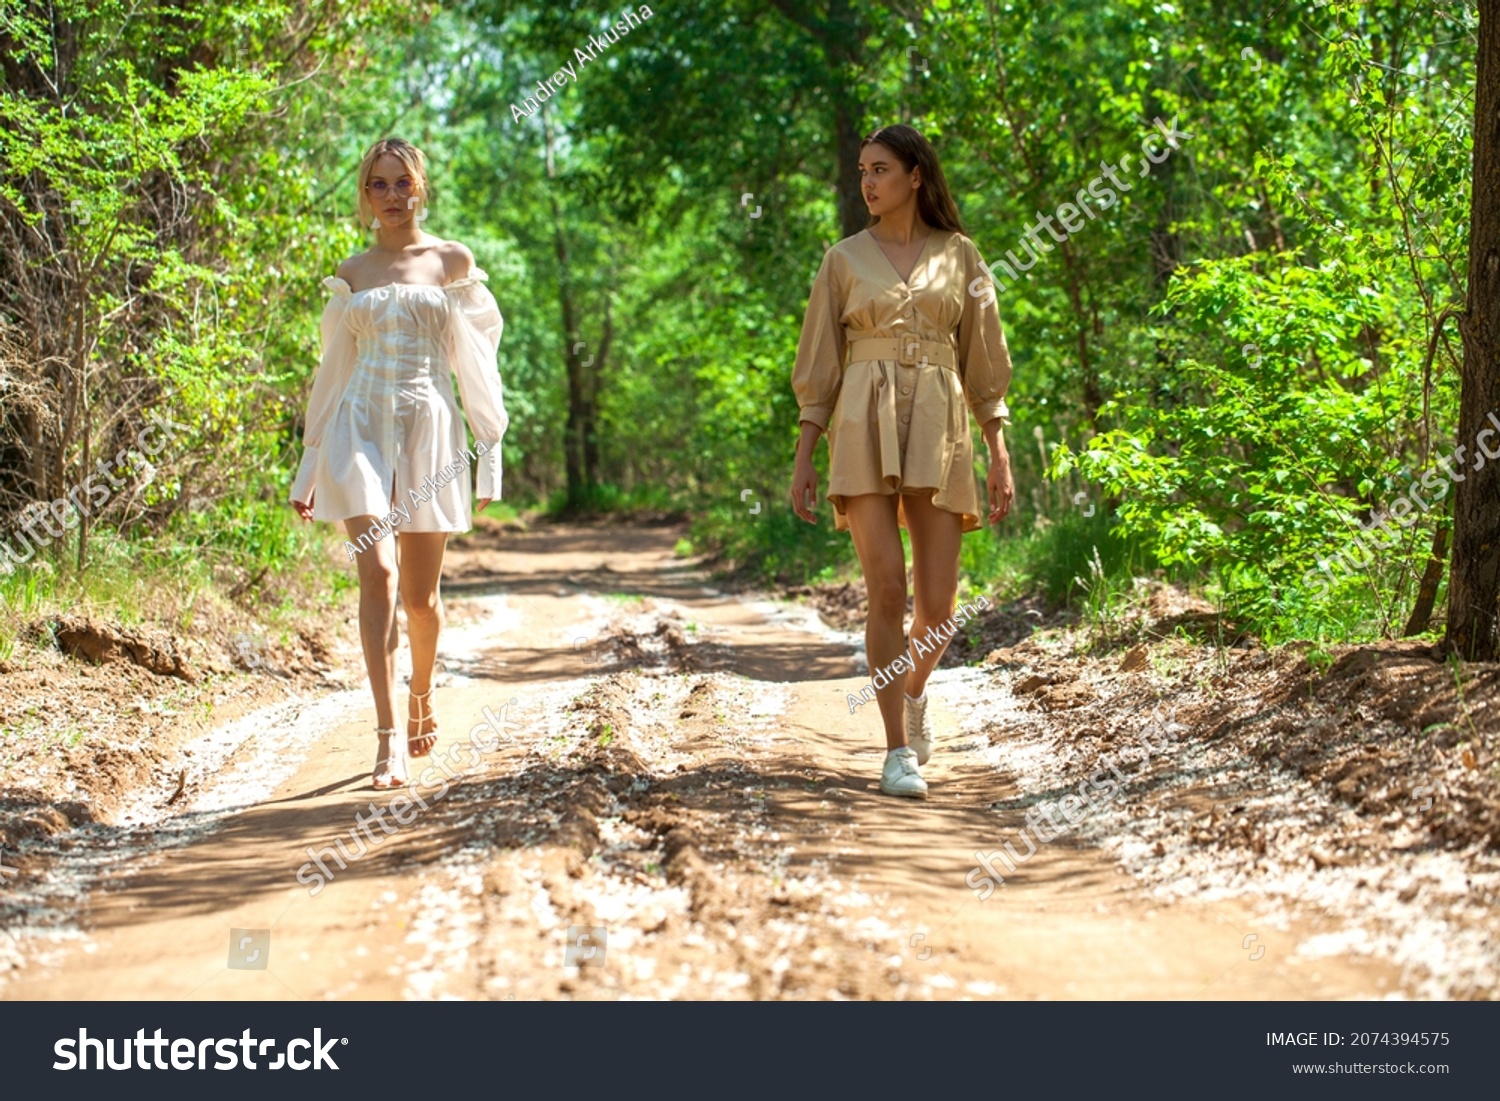 Two chicks in pretty summer outfits walk across the street